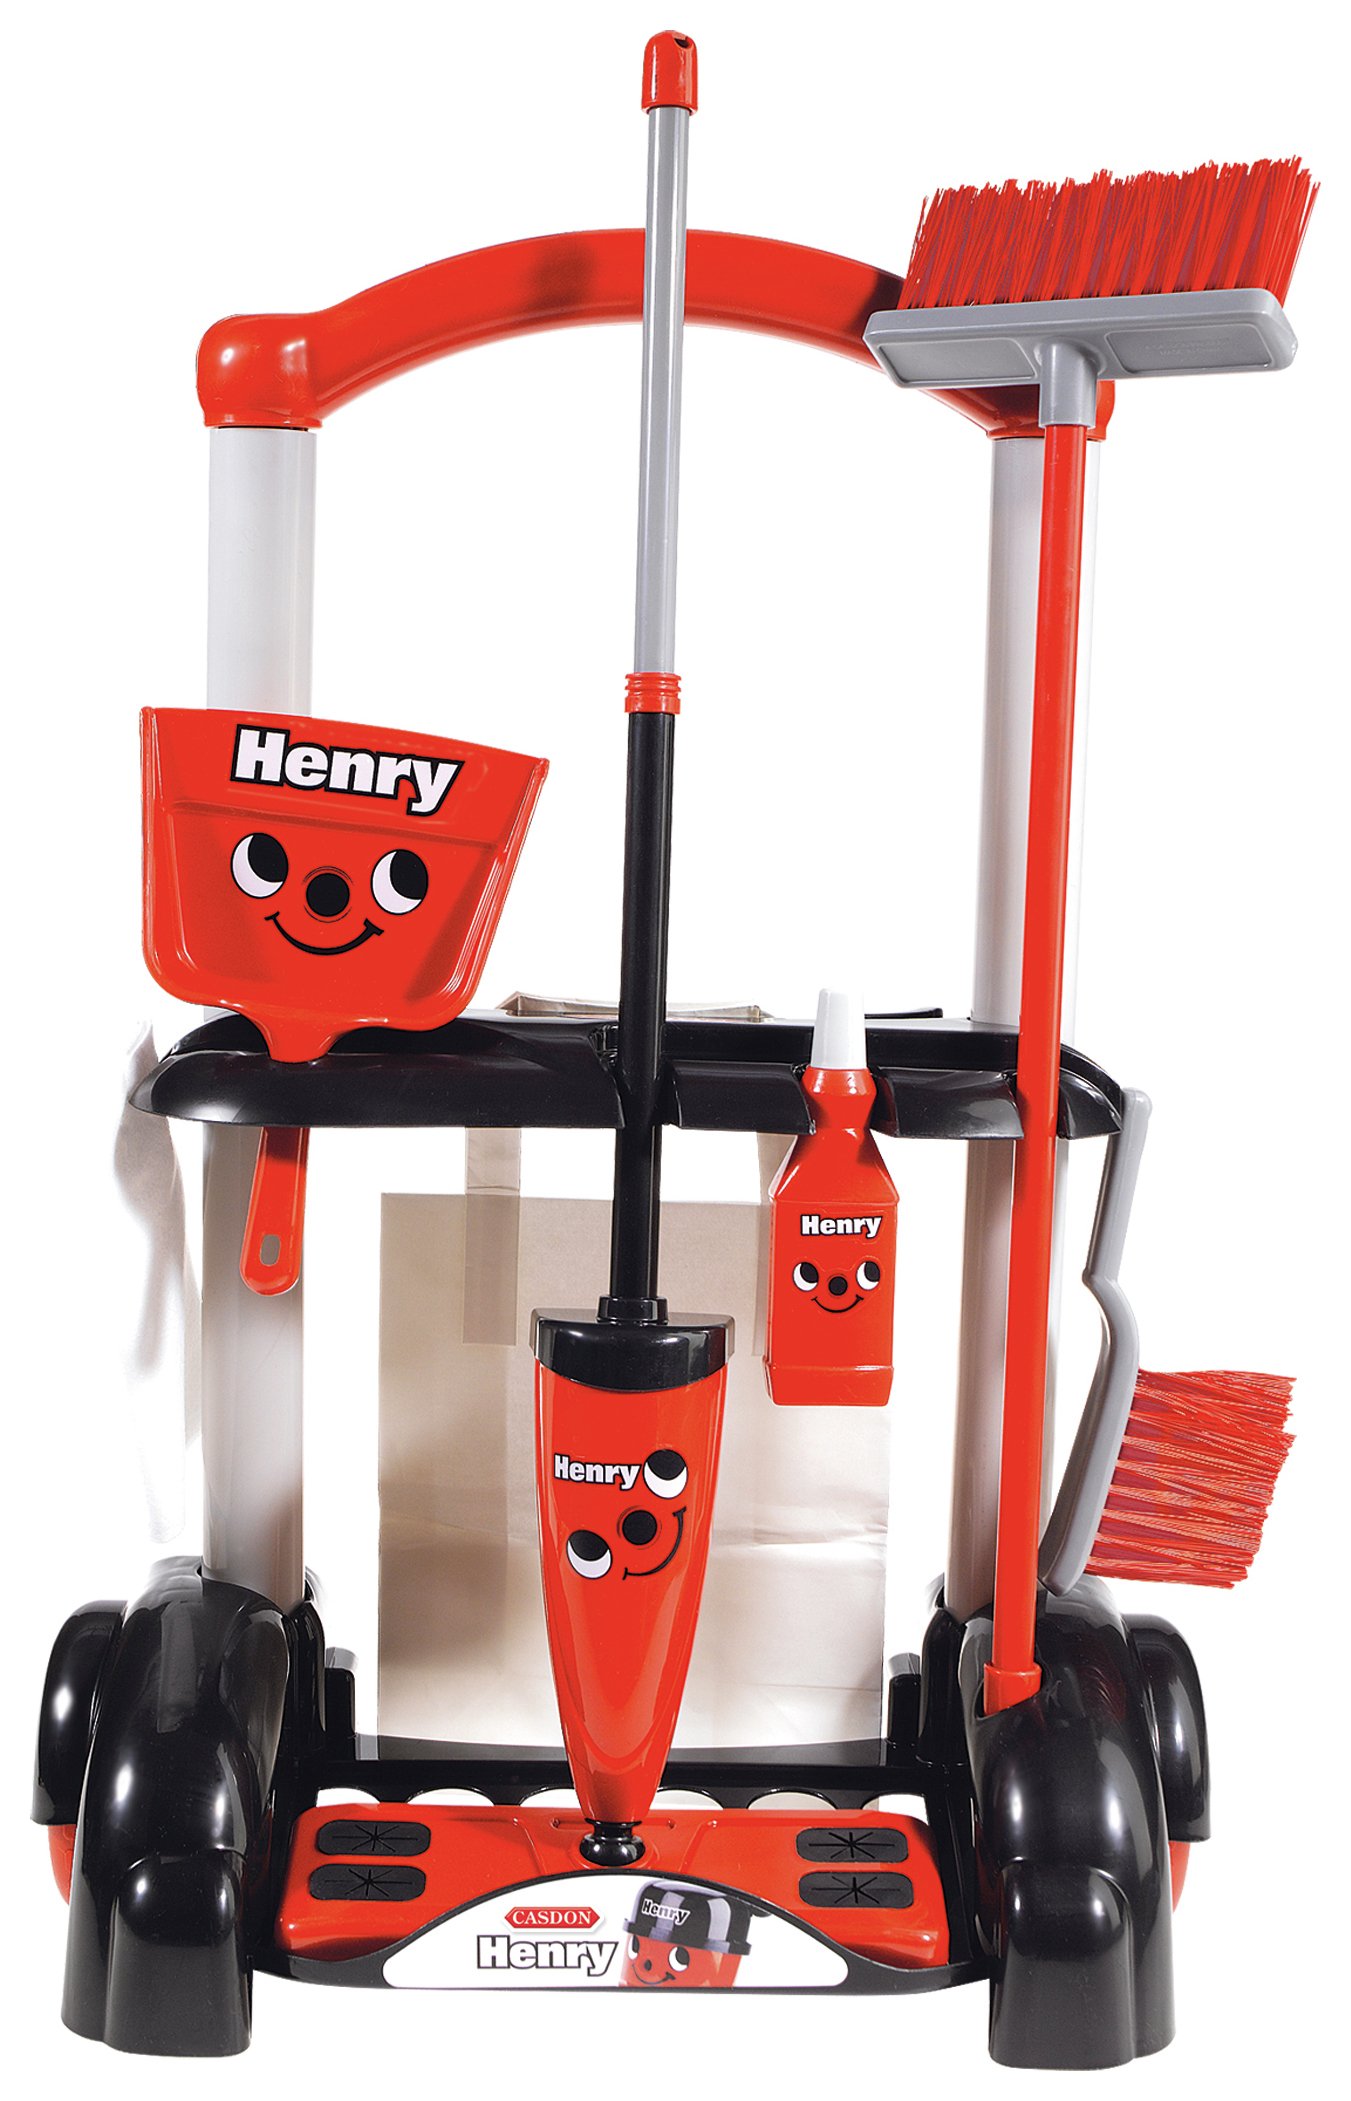 childrens hetty cleaning trolley